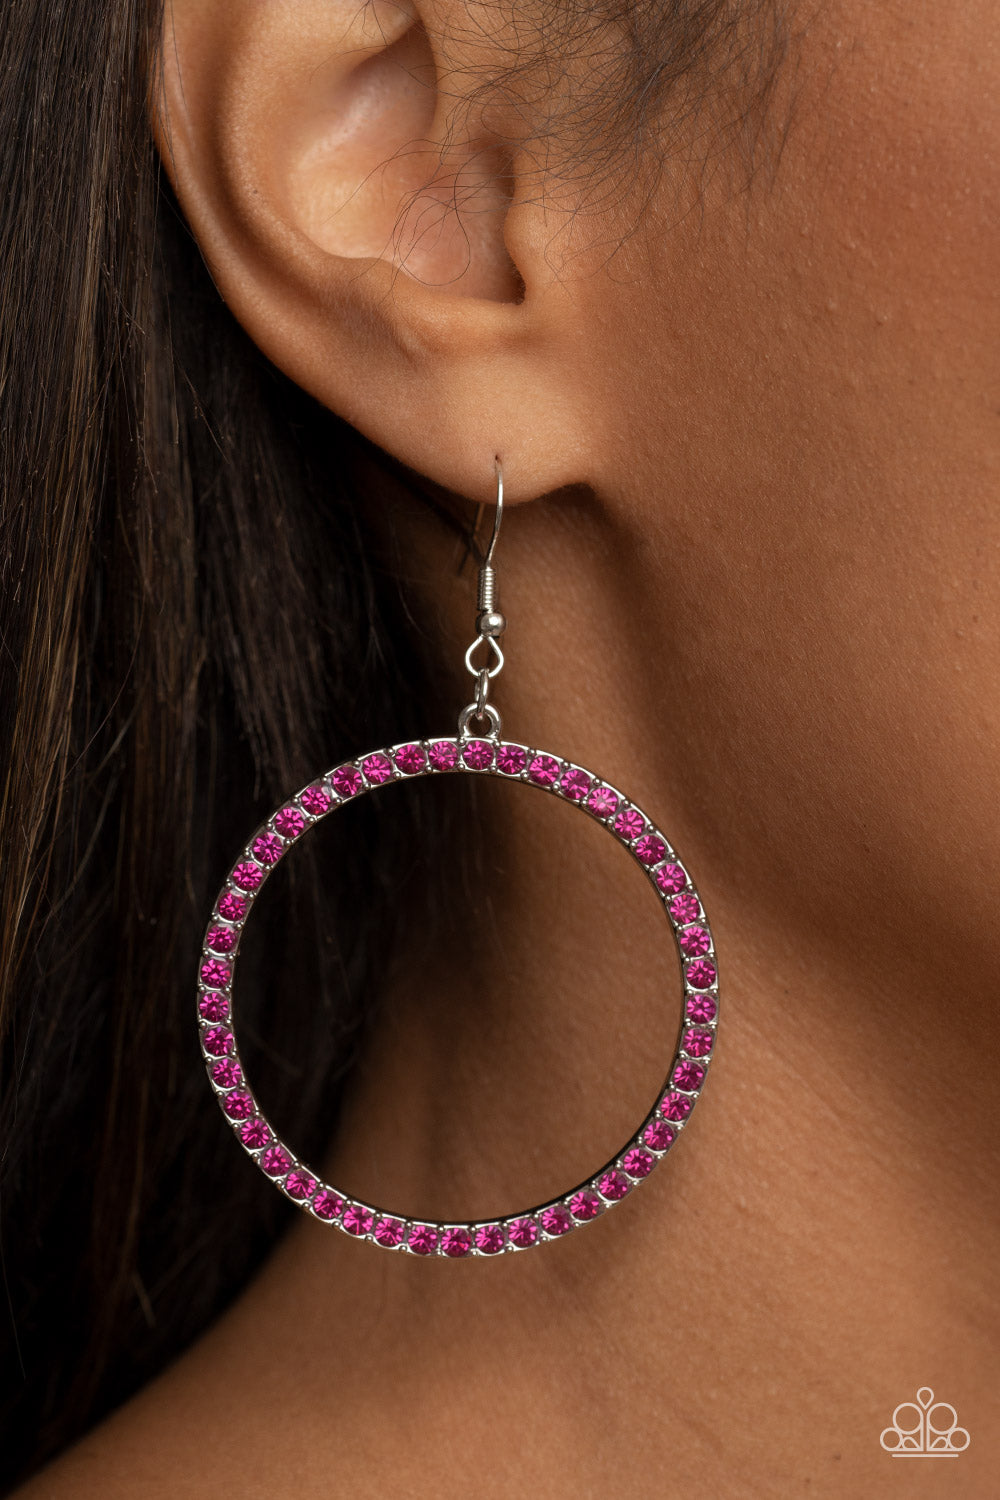 Head-Turning Halo - Fuchsia Pink and Silver Rhinestone Earrings - Paparazzi Accessories - The front of an oversized silver ring is encrusted in glitzy Fuchsia Fedora rhinestones, resulting in a head-turning hoop. Earring attaches to a standard fishhook fitting.